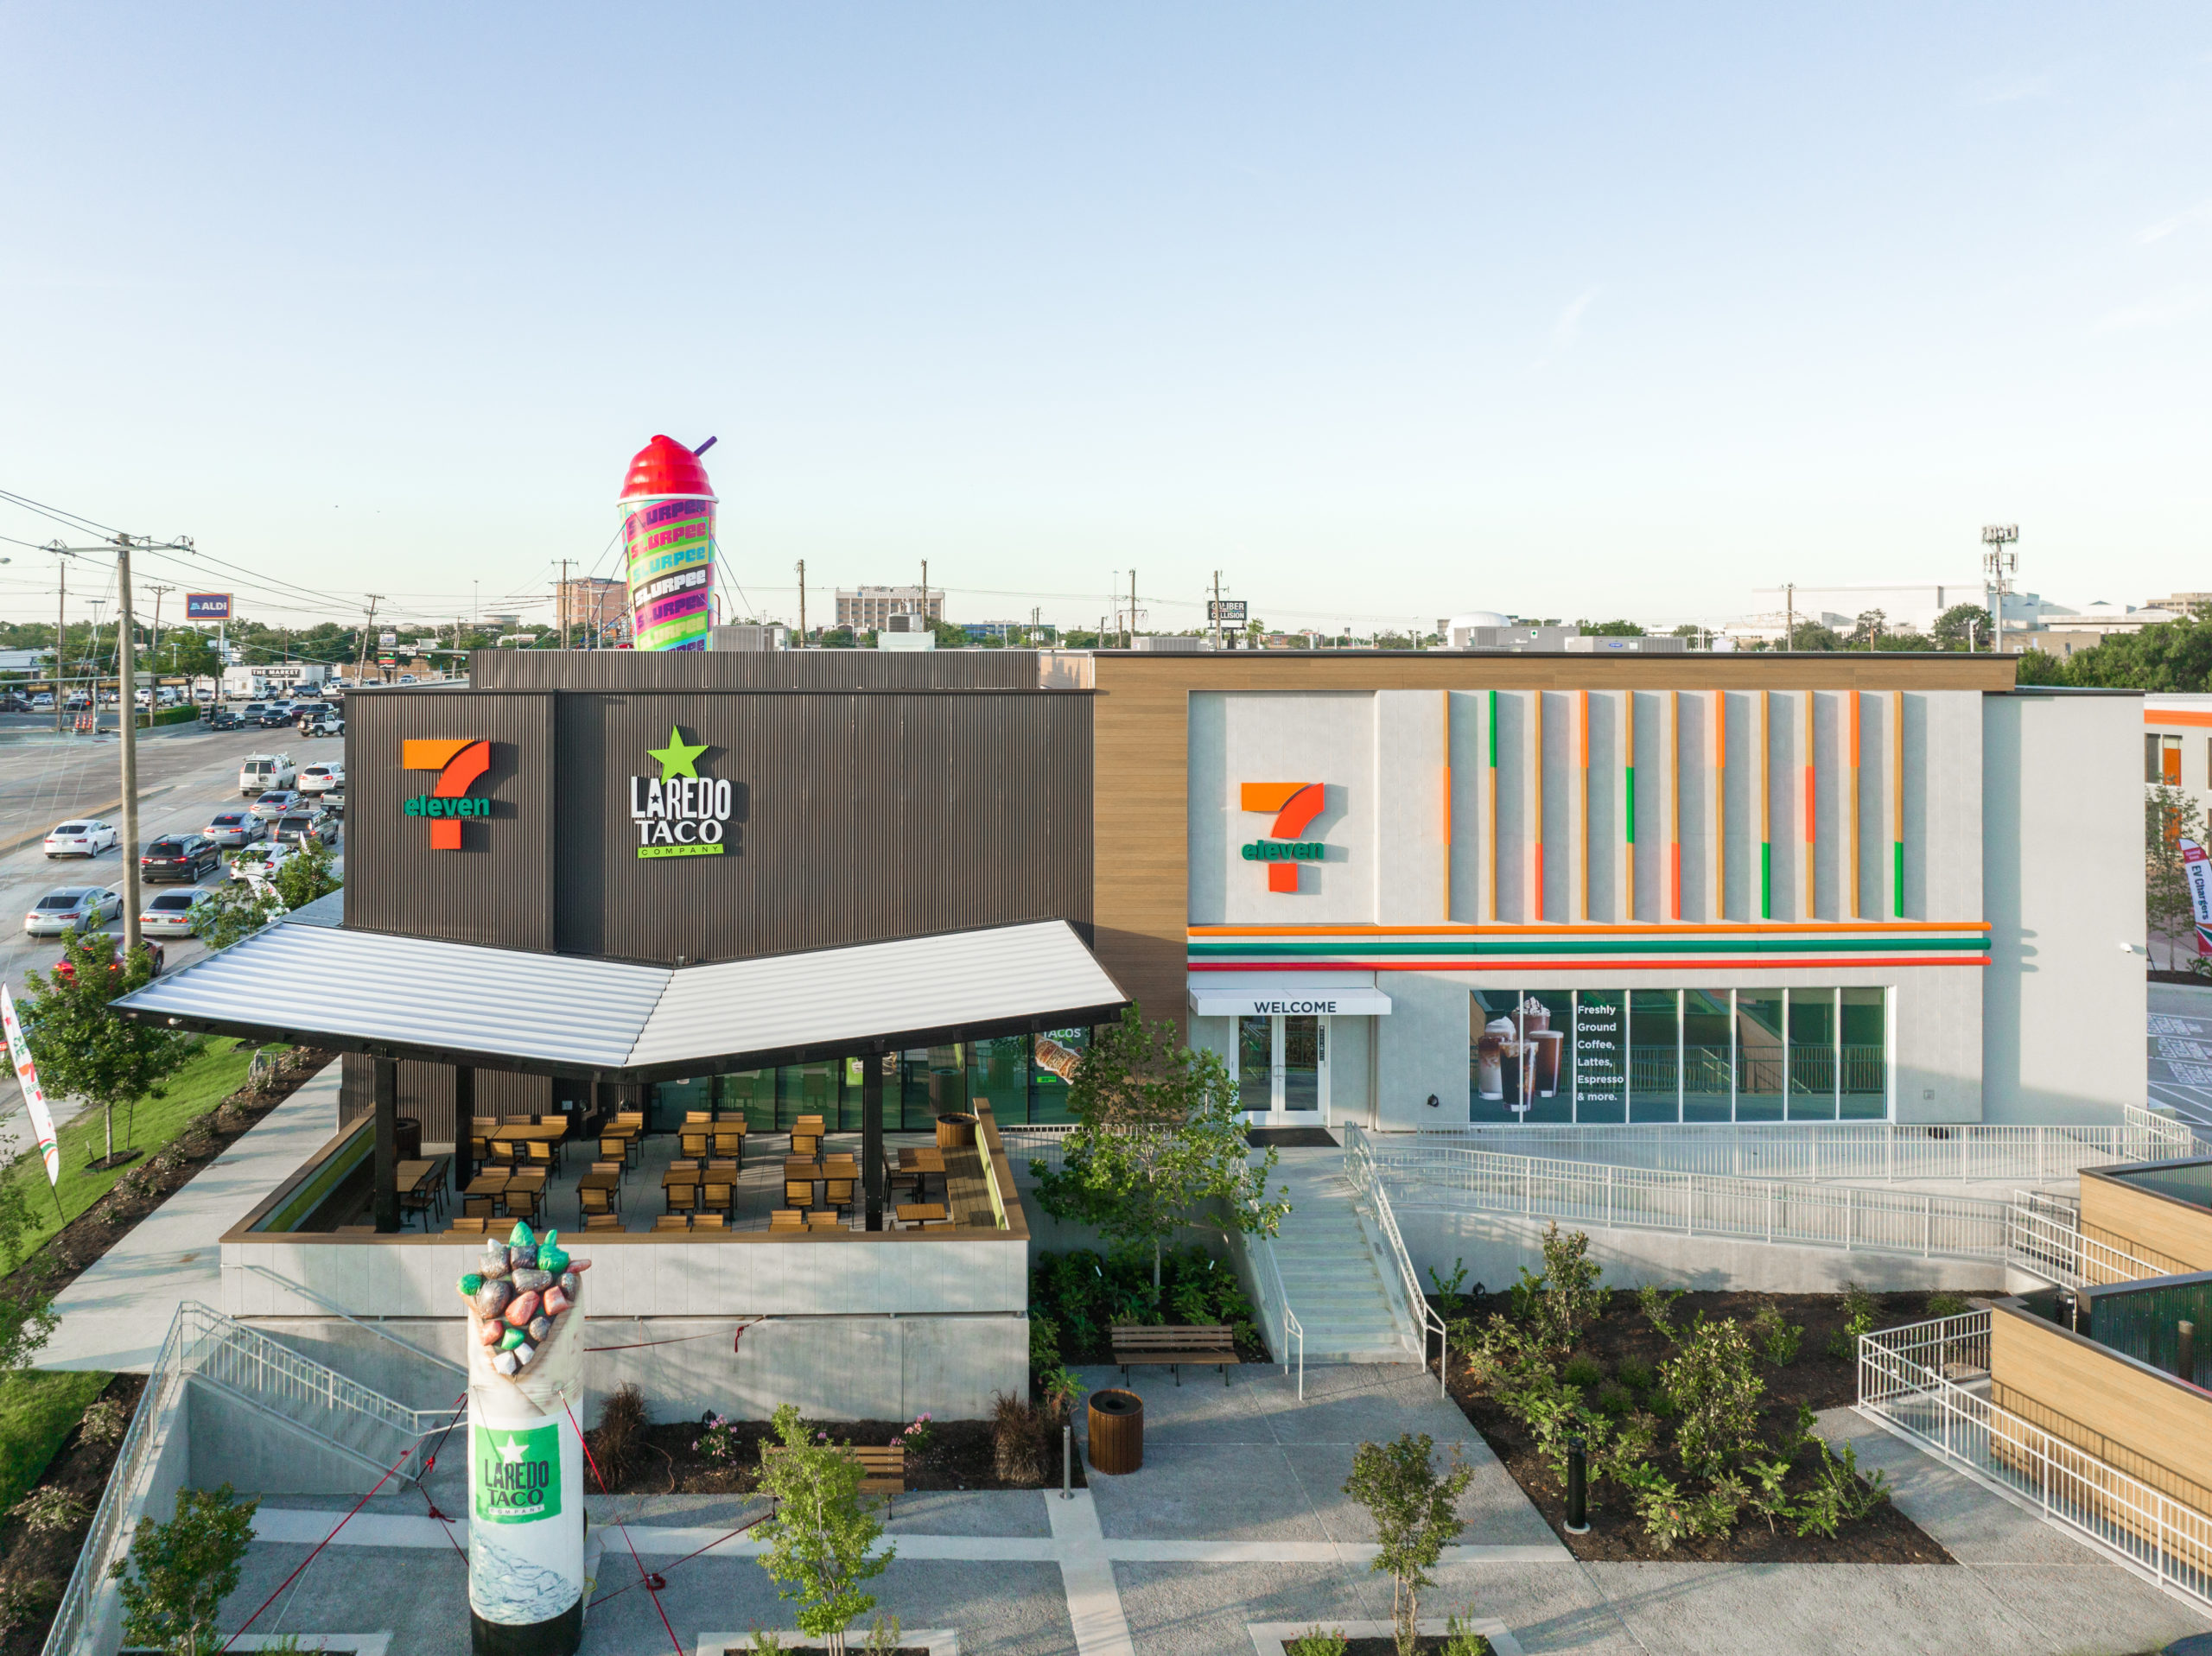 7-Eleven opens new concept Evolution store in Texas - Produce Blue